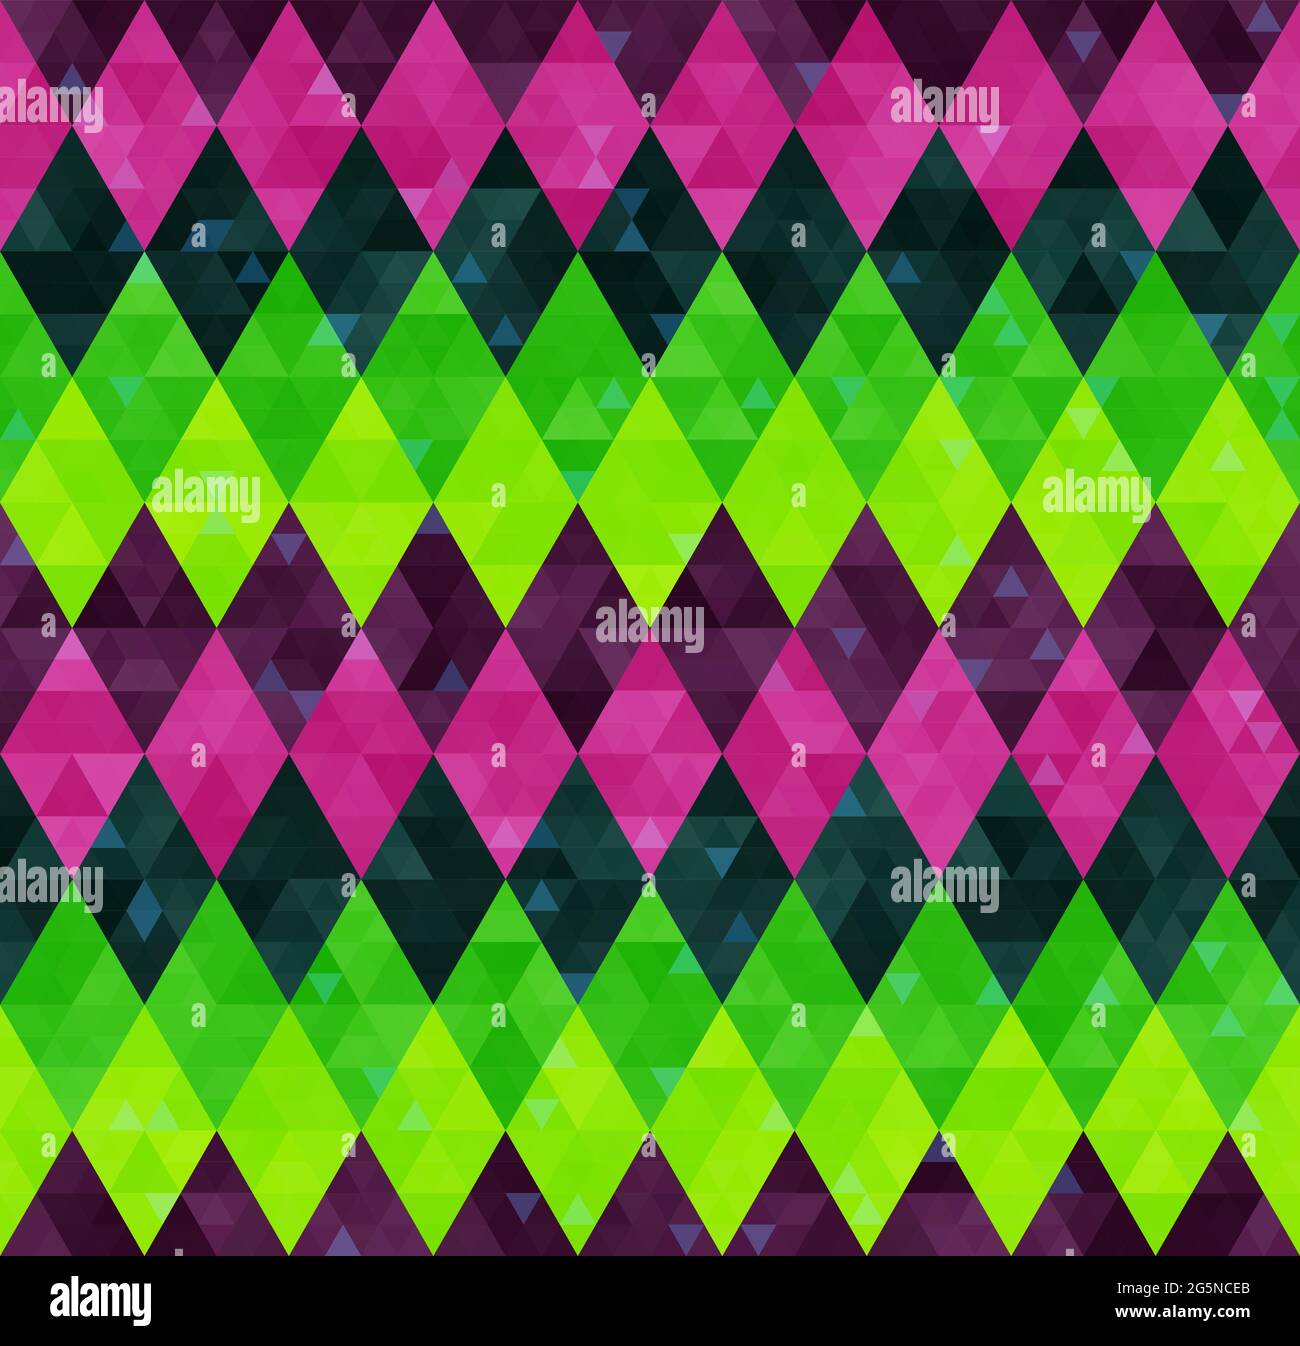 Abstract geometric seamless harlequin pattern from rows of rhombuses in green, pink and purple colors. Mardi Gras holiday poster backdrop, design, wrapping paper, cover, wallpaper, packaging. Stock Vector